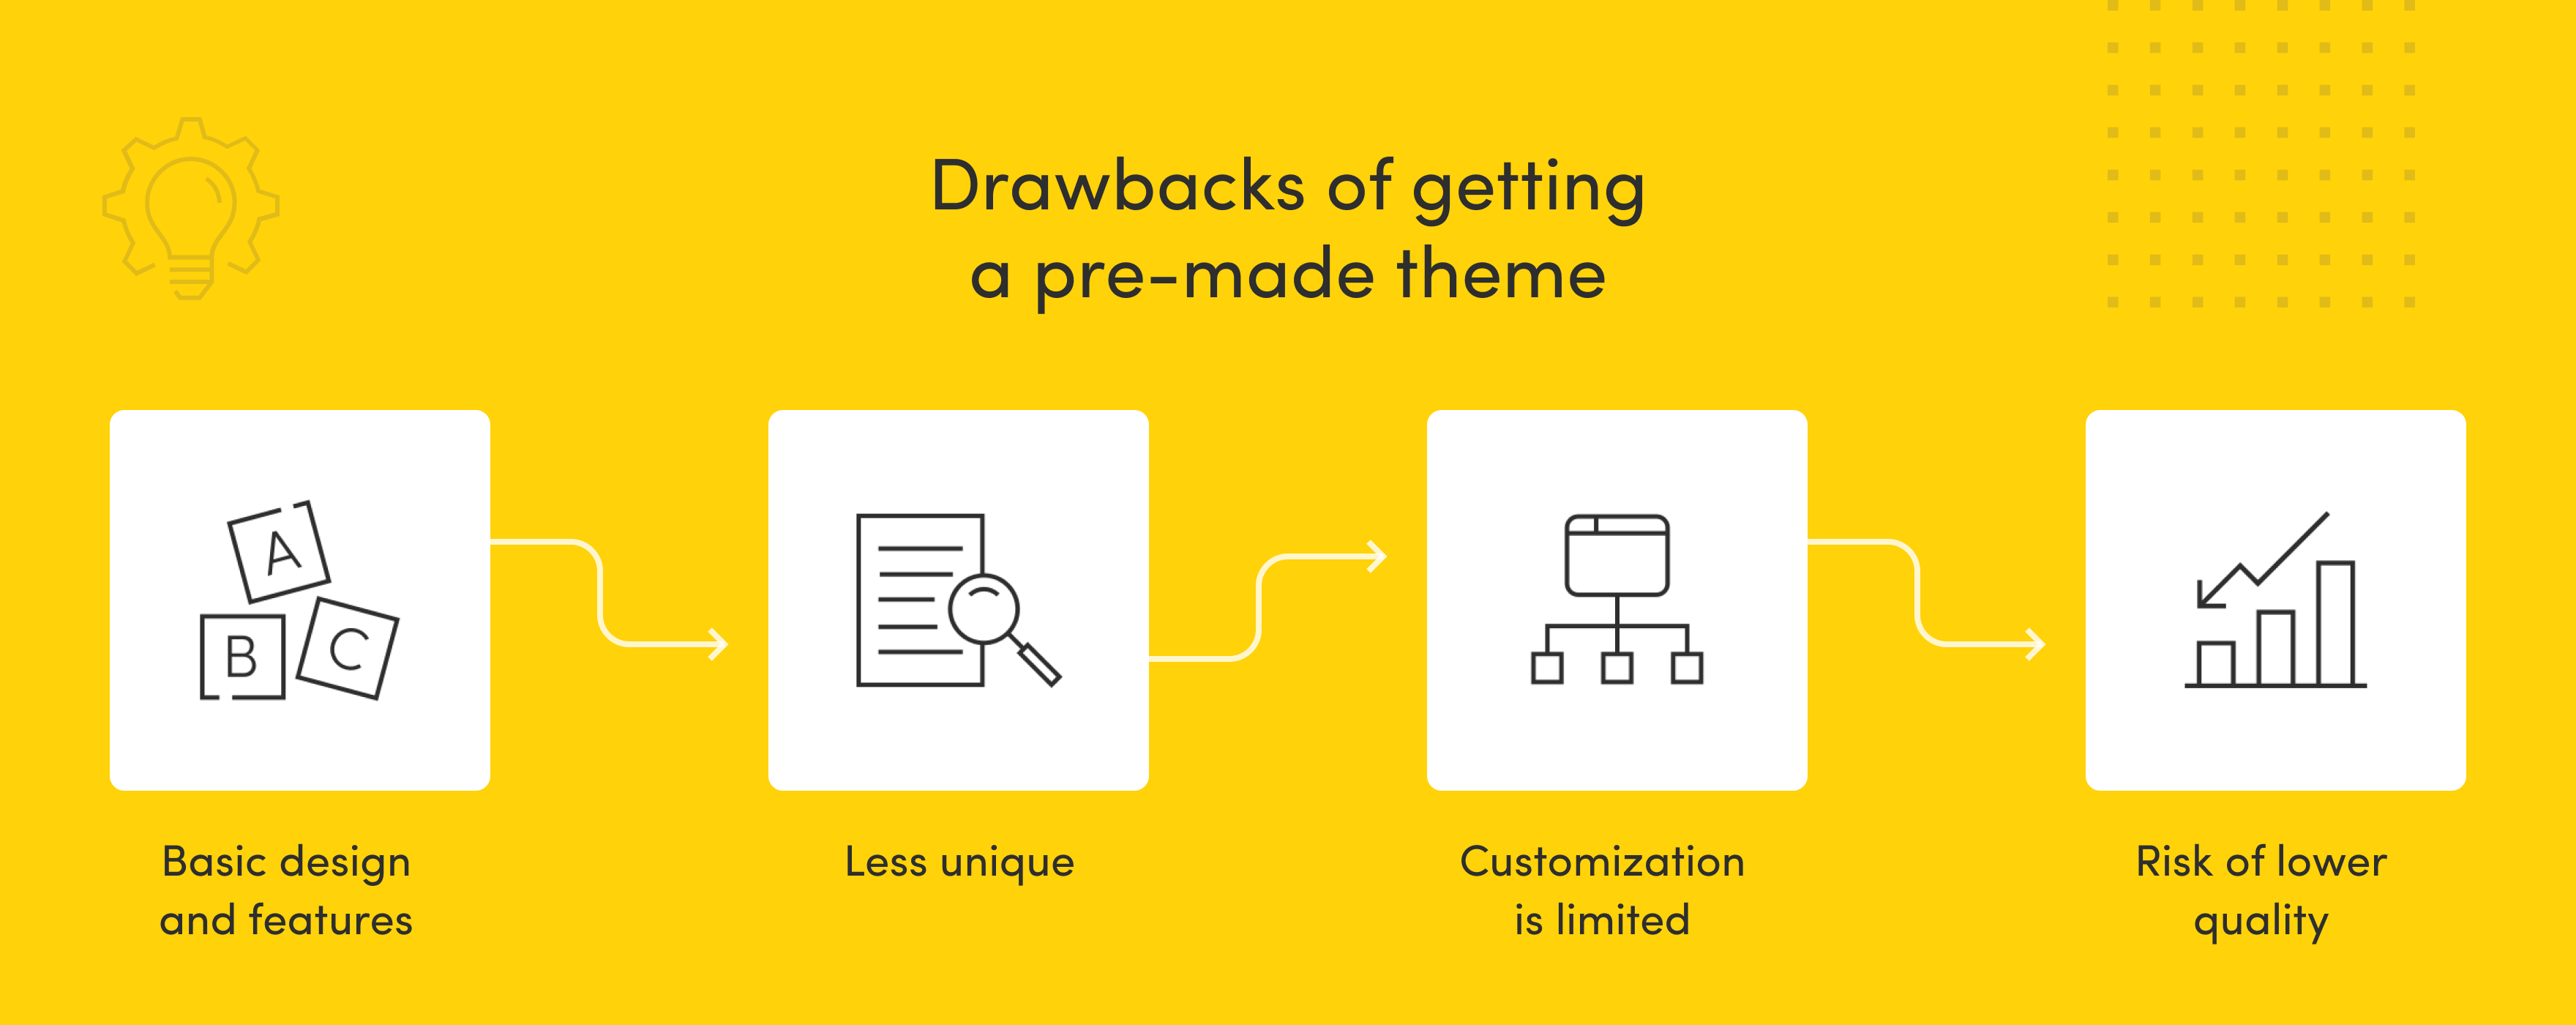 An infographic highlighting the drawbacks of using a pre-made theme. Four icons with labels detail the disadvantages: blocks with letters 'A', 'B', and 'C' illustrating 'Basic design and features', a paper with a magnifying glass indicating 'Less unique', a hierarchical structure representing 'Customization is limited', and a bar graph with an upward arrow denoting 'Risk of lower quality'.